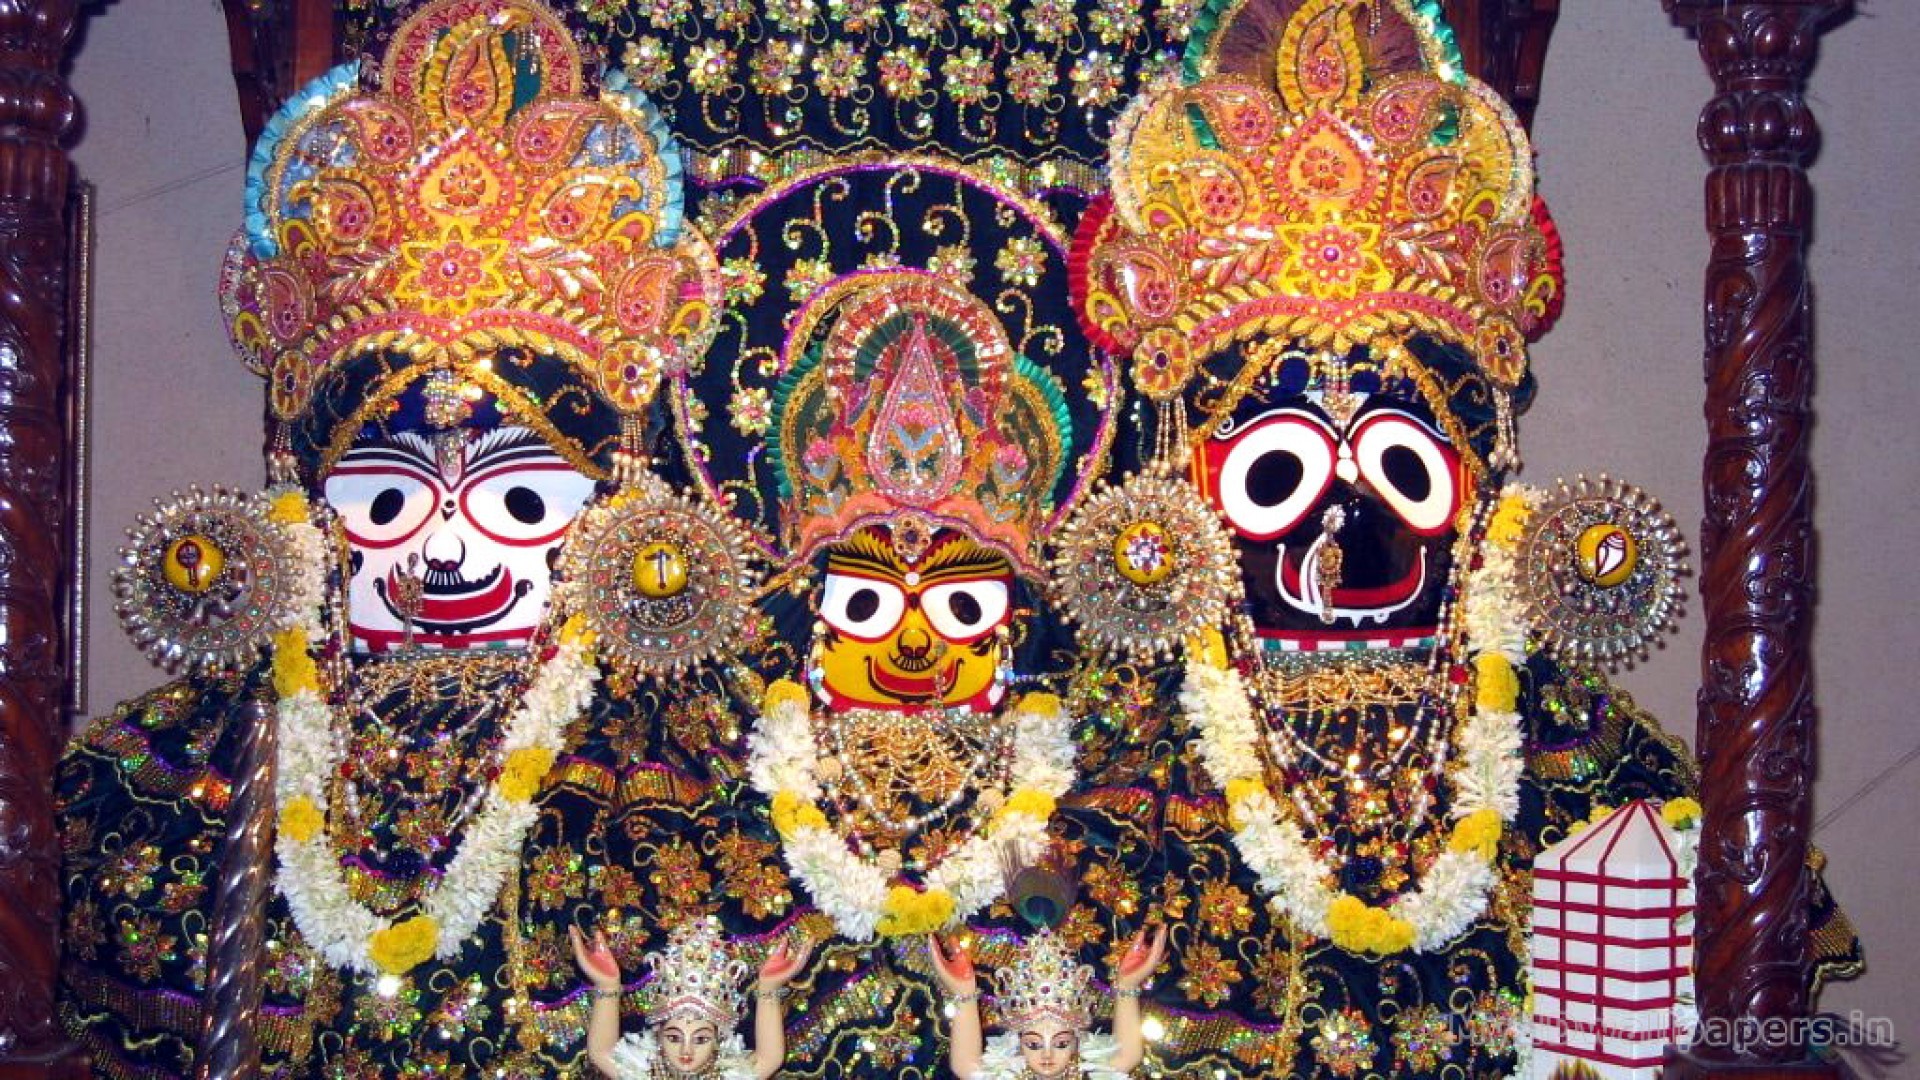 1920x1080 Click here to download in HD Format >> Lord Jagannath Hd Wallpapers For Pc  http